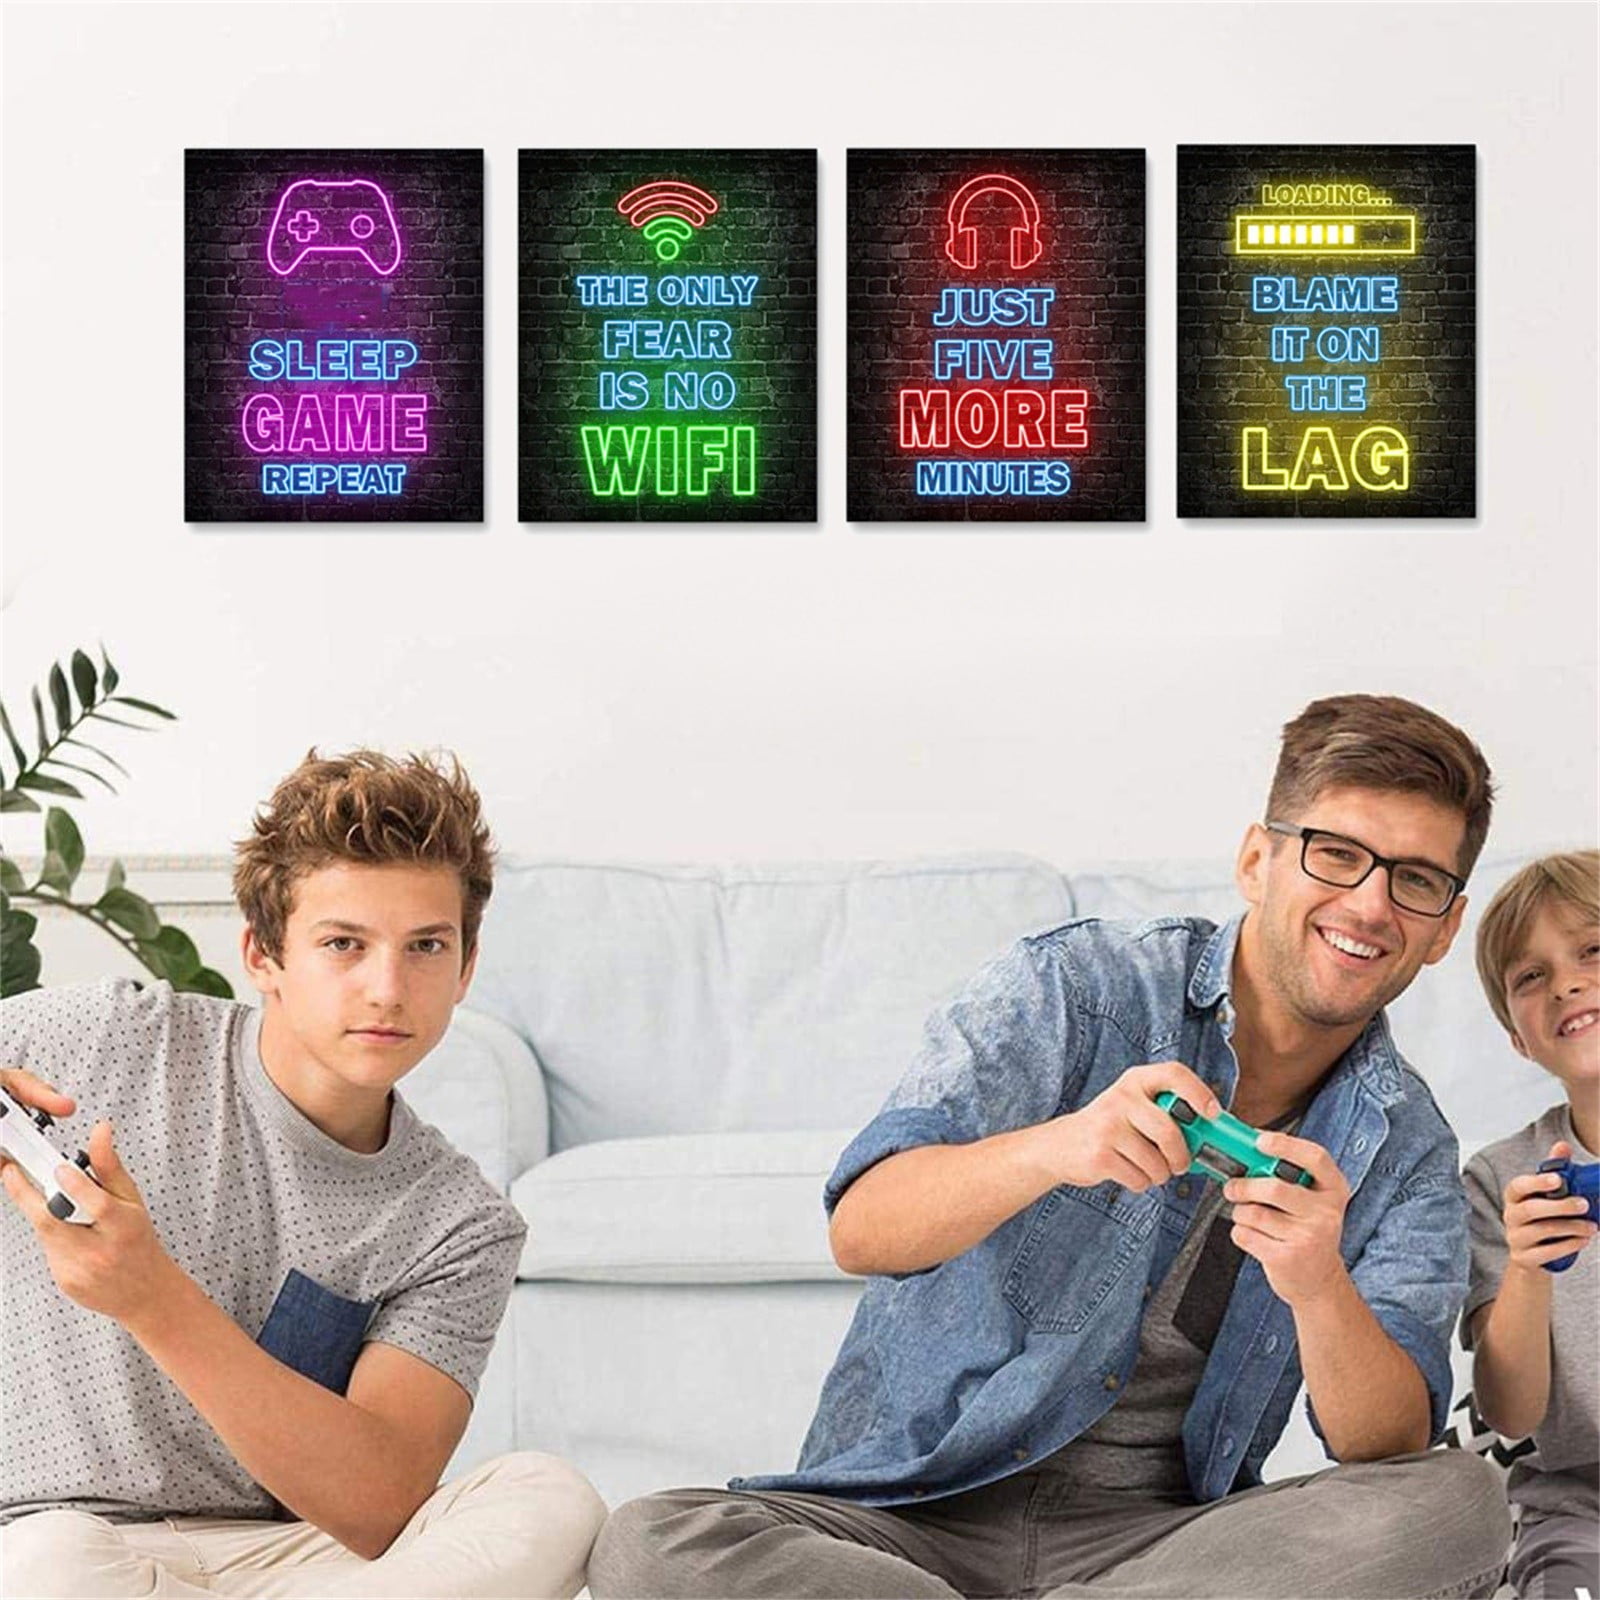  Gamer Room Decor - Neon Gaming Posters Bedroom Decor, Gaming  Accessories for your Playstation Gaming Stuff, Video Games Lover Gift